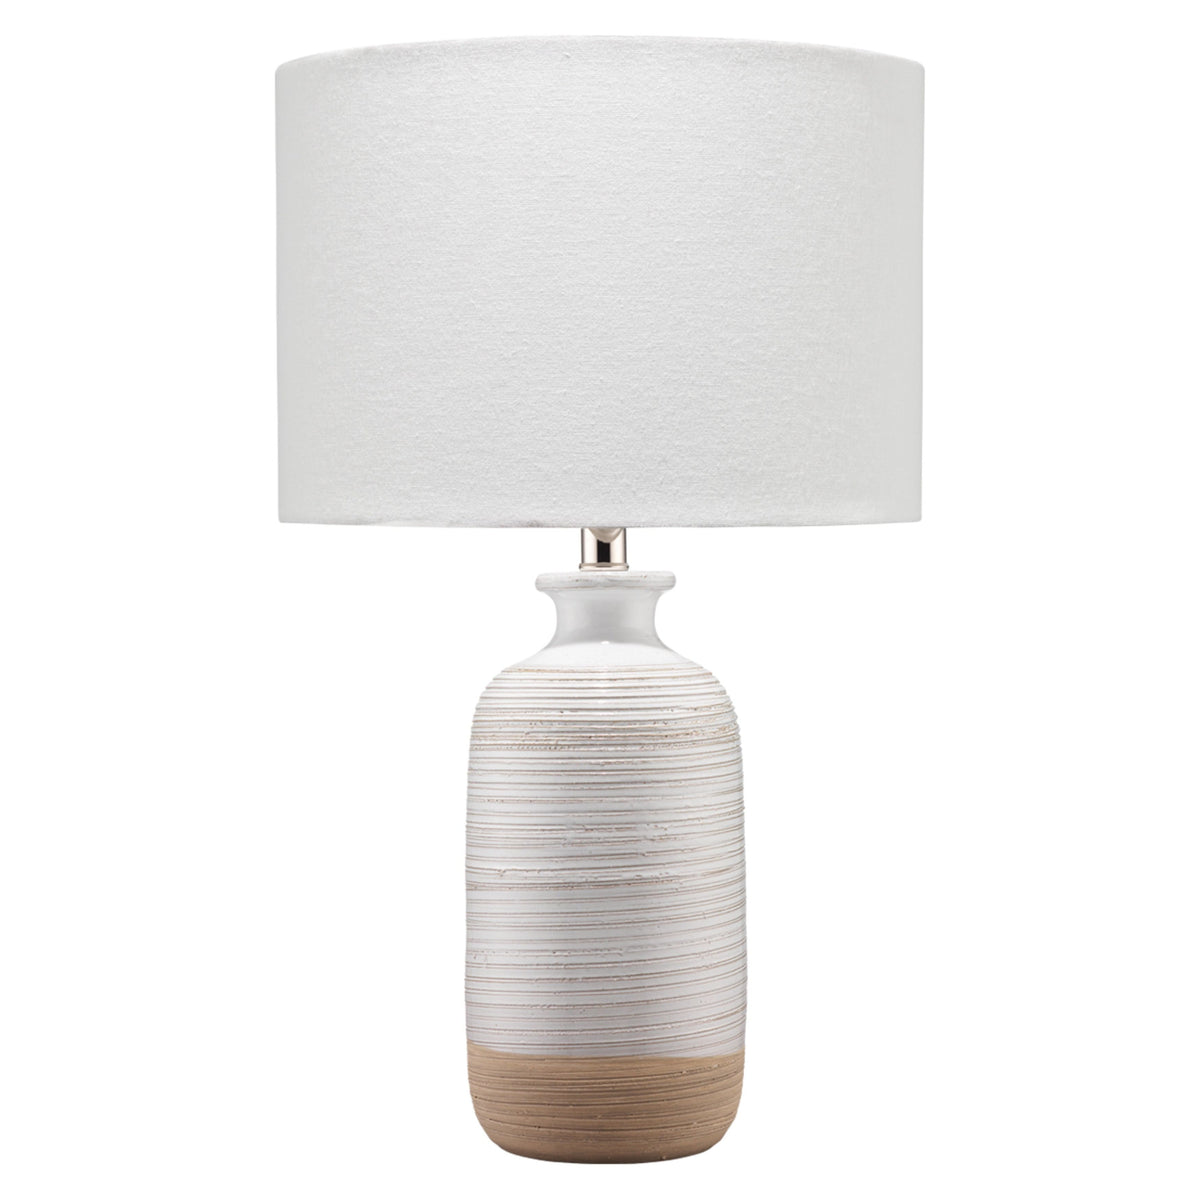 Jamie Young Company - BL217-TL7 - Ashwell Table Lamp - Ashwell - White